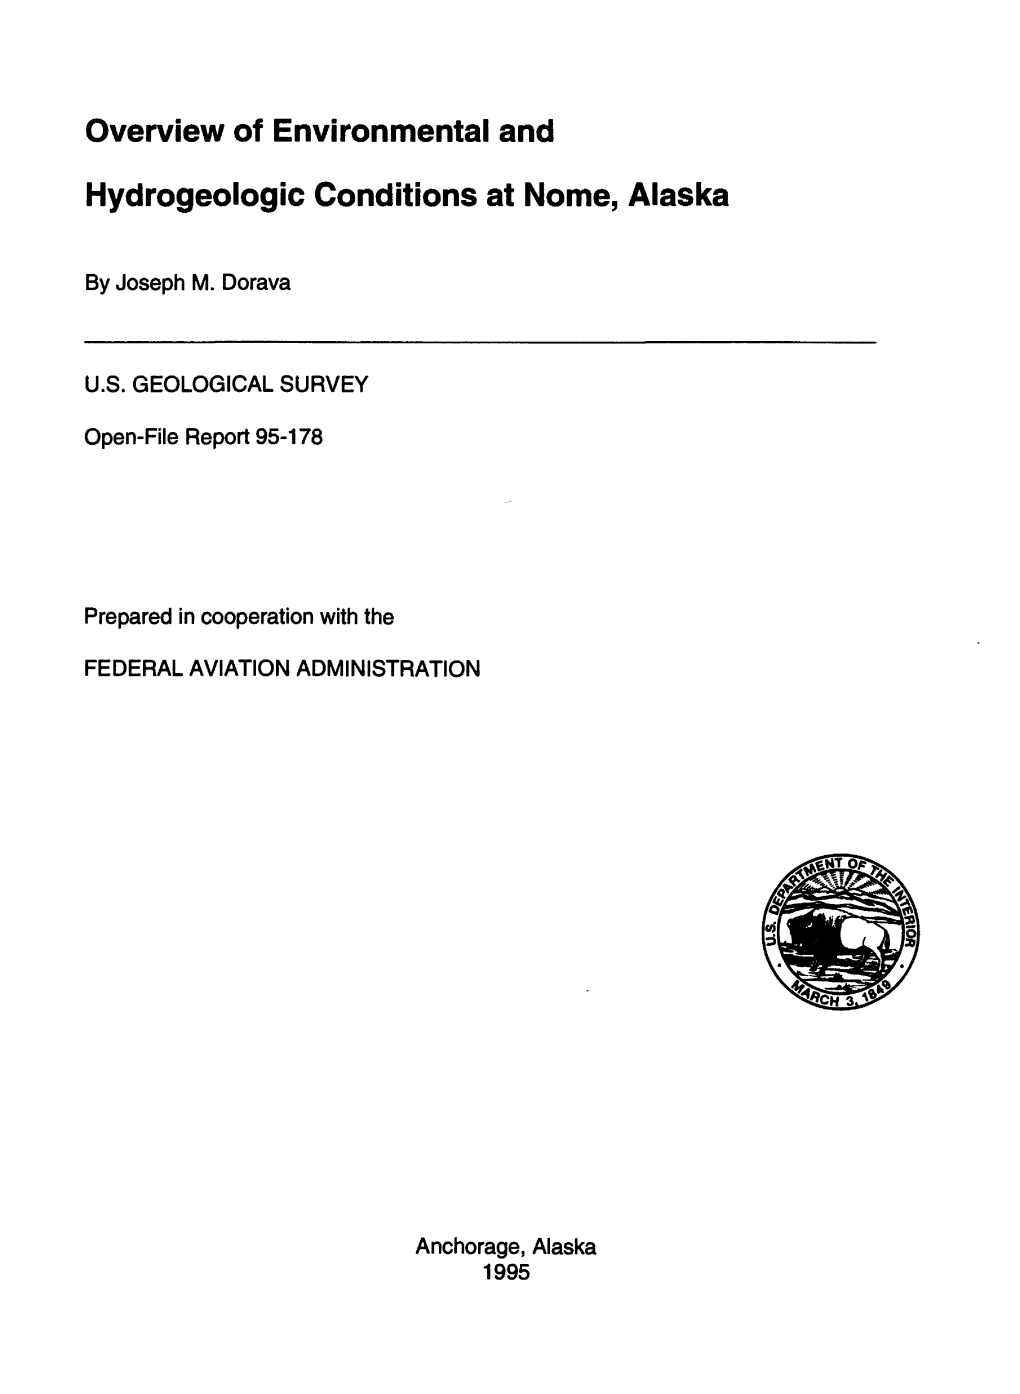 Overview of Environmental and Hydrogeologic Conditions at Nome, Alaska